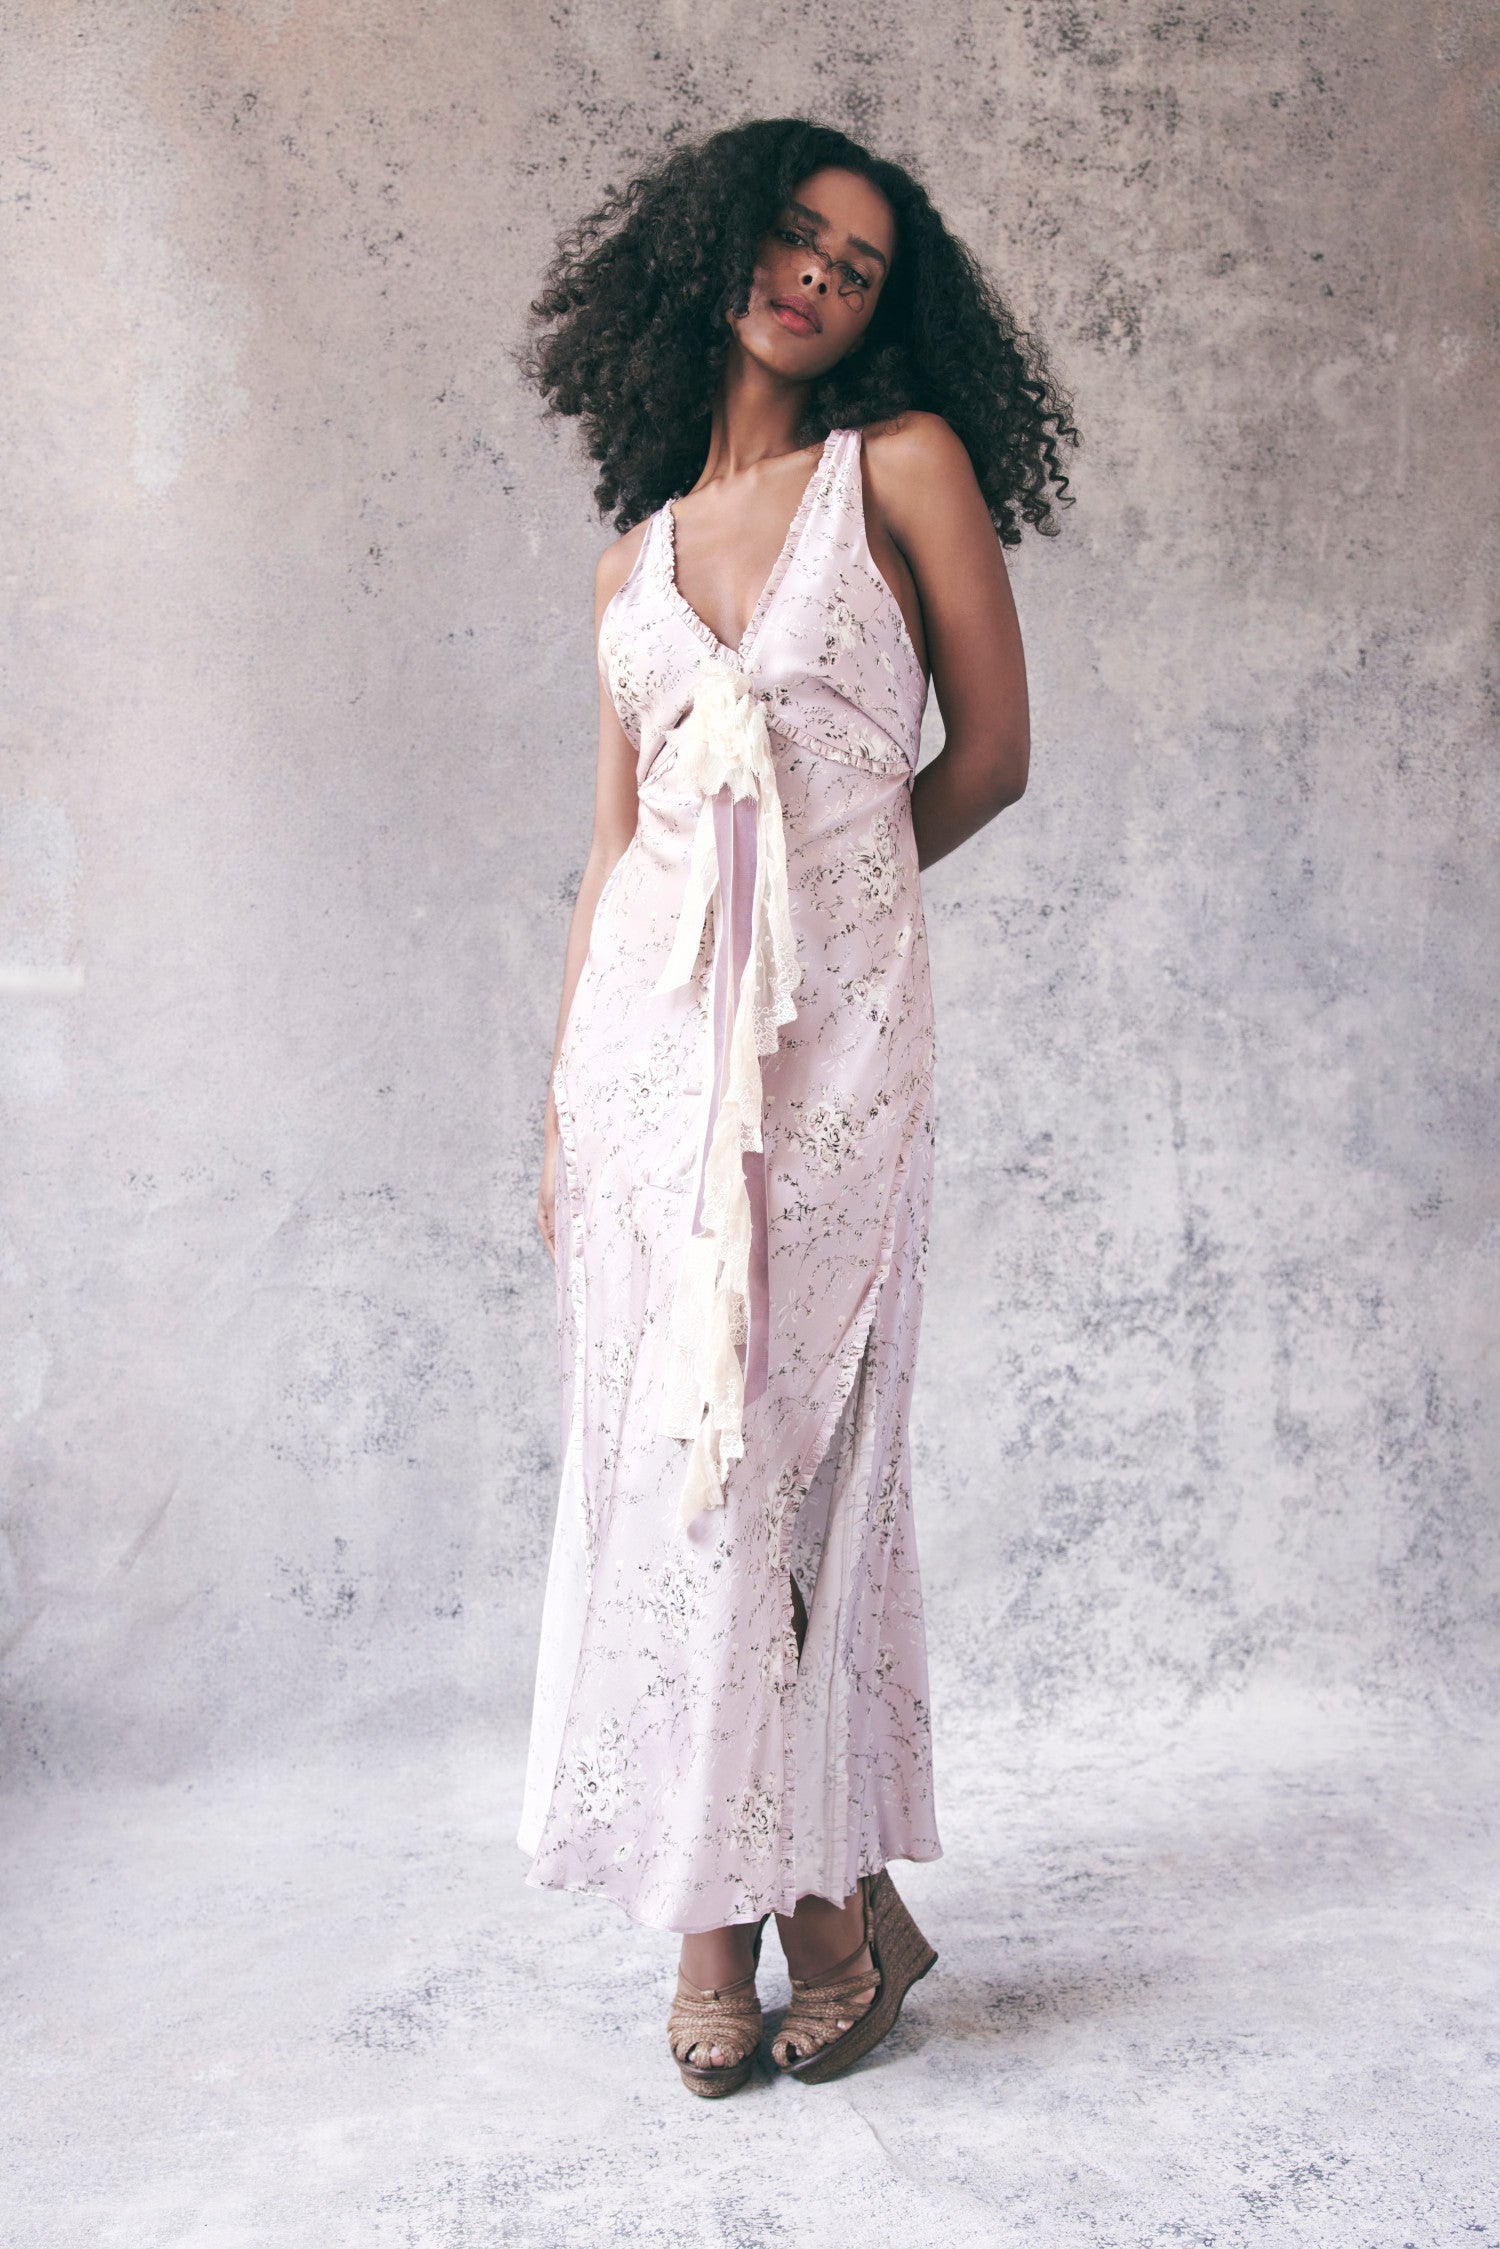 Model wearing light pink floral maxi dress with ruffle trim detail